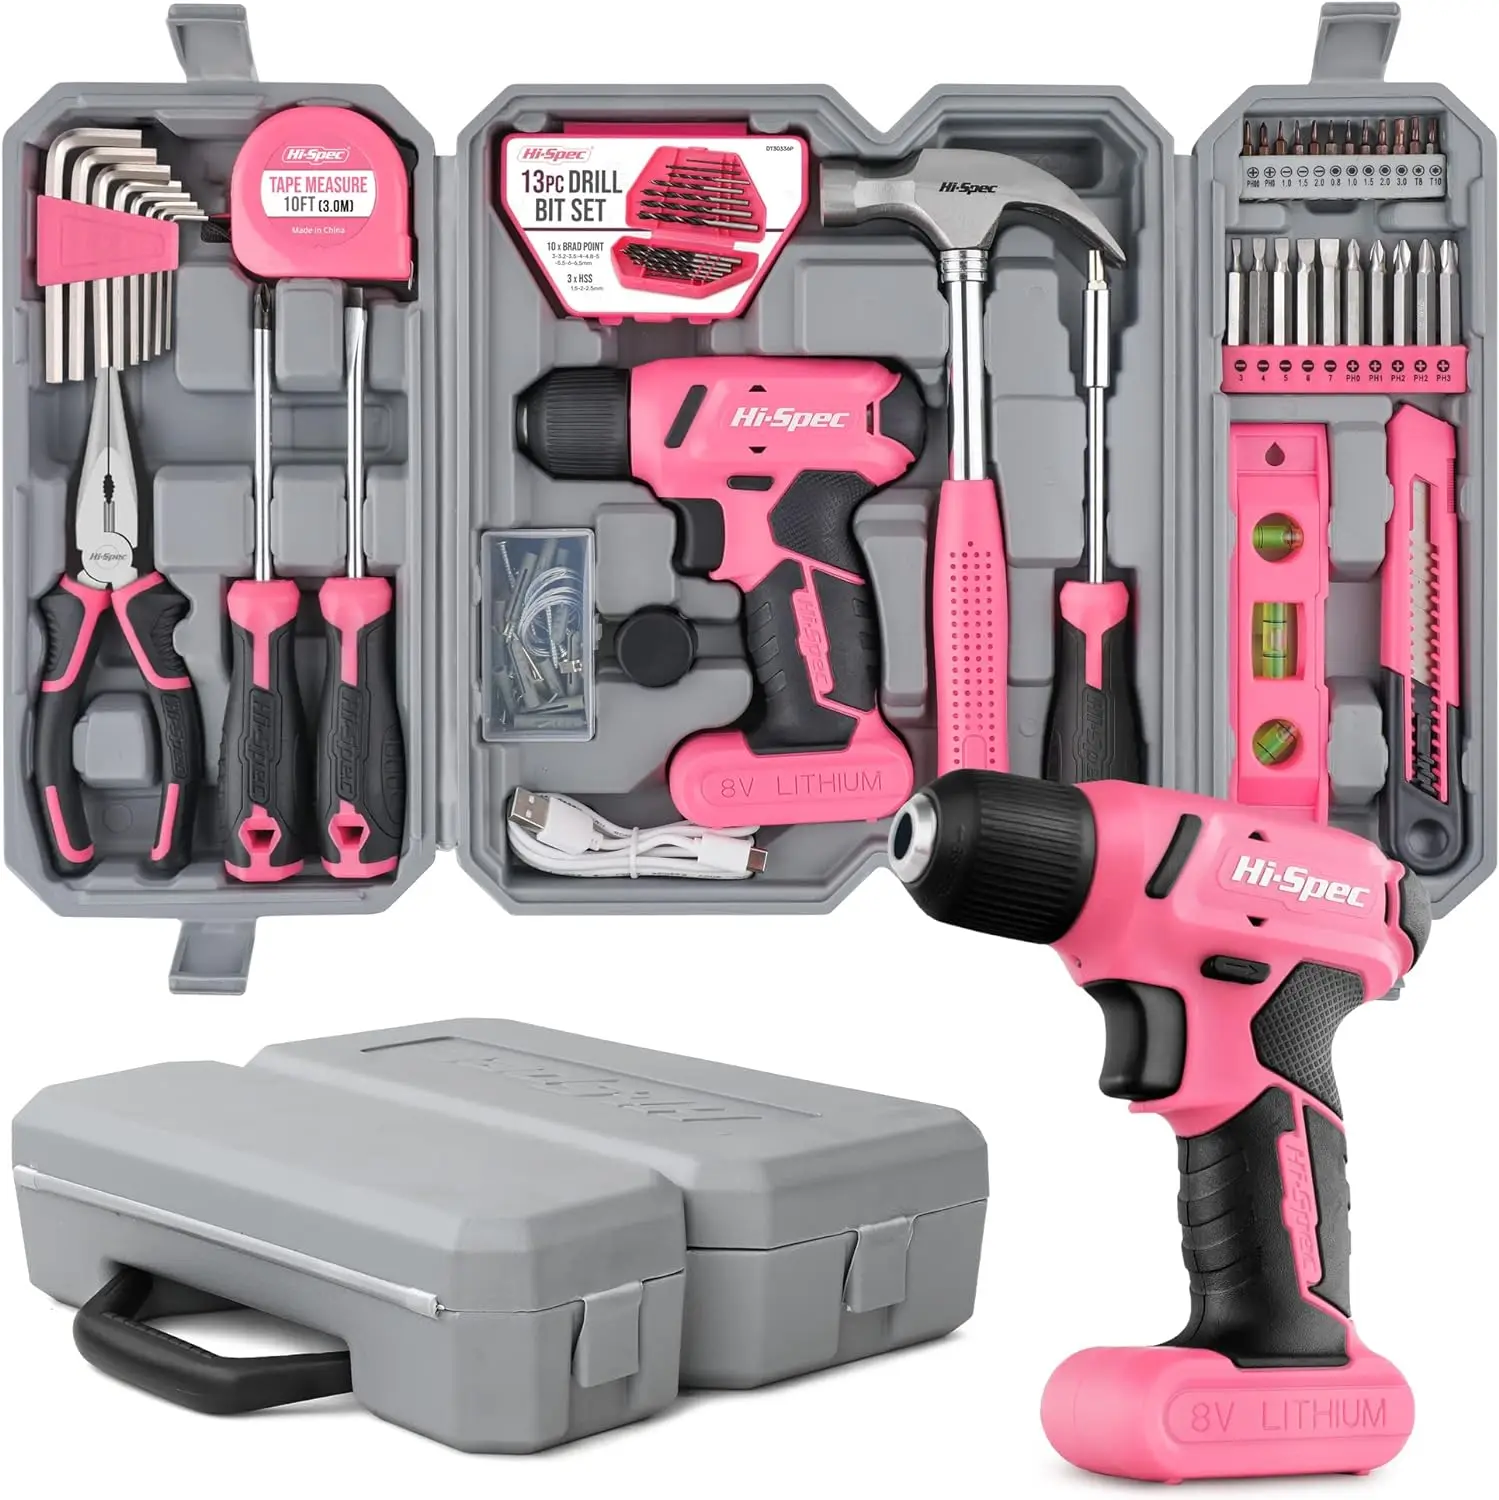 

58pc Pink 8V USB Electric Drill Driver & Household Tool Kit Set With Variable Speed DIY Cordless Power Screwdriver